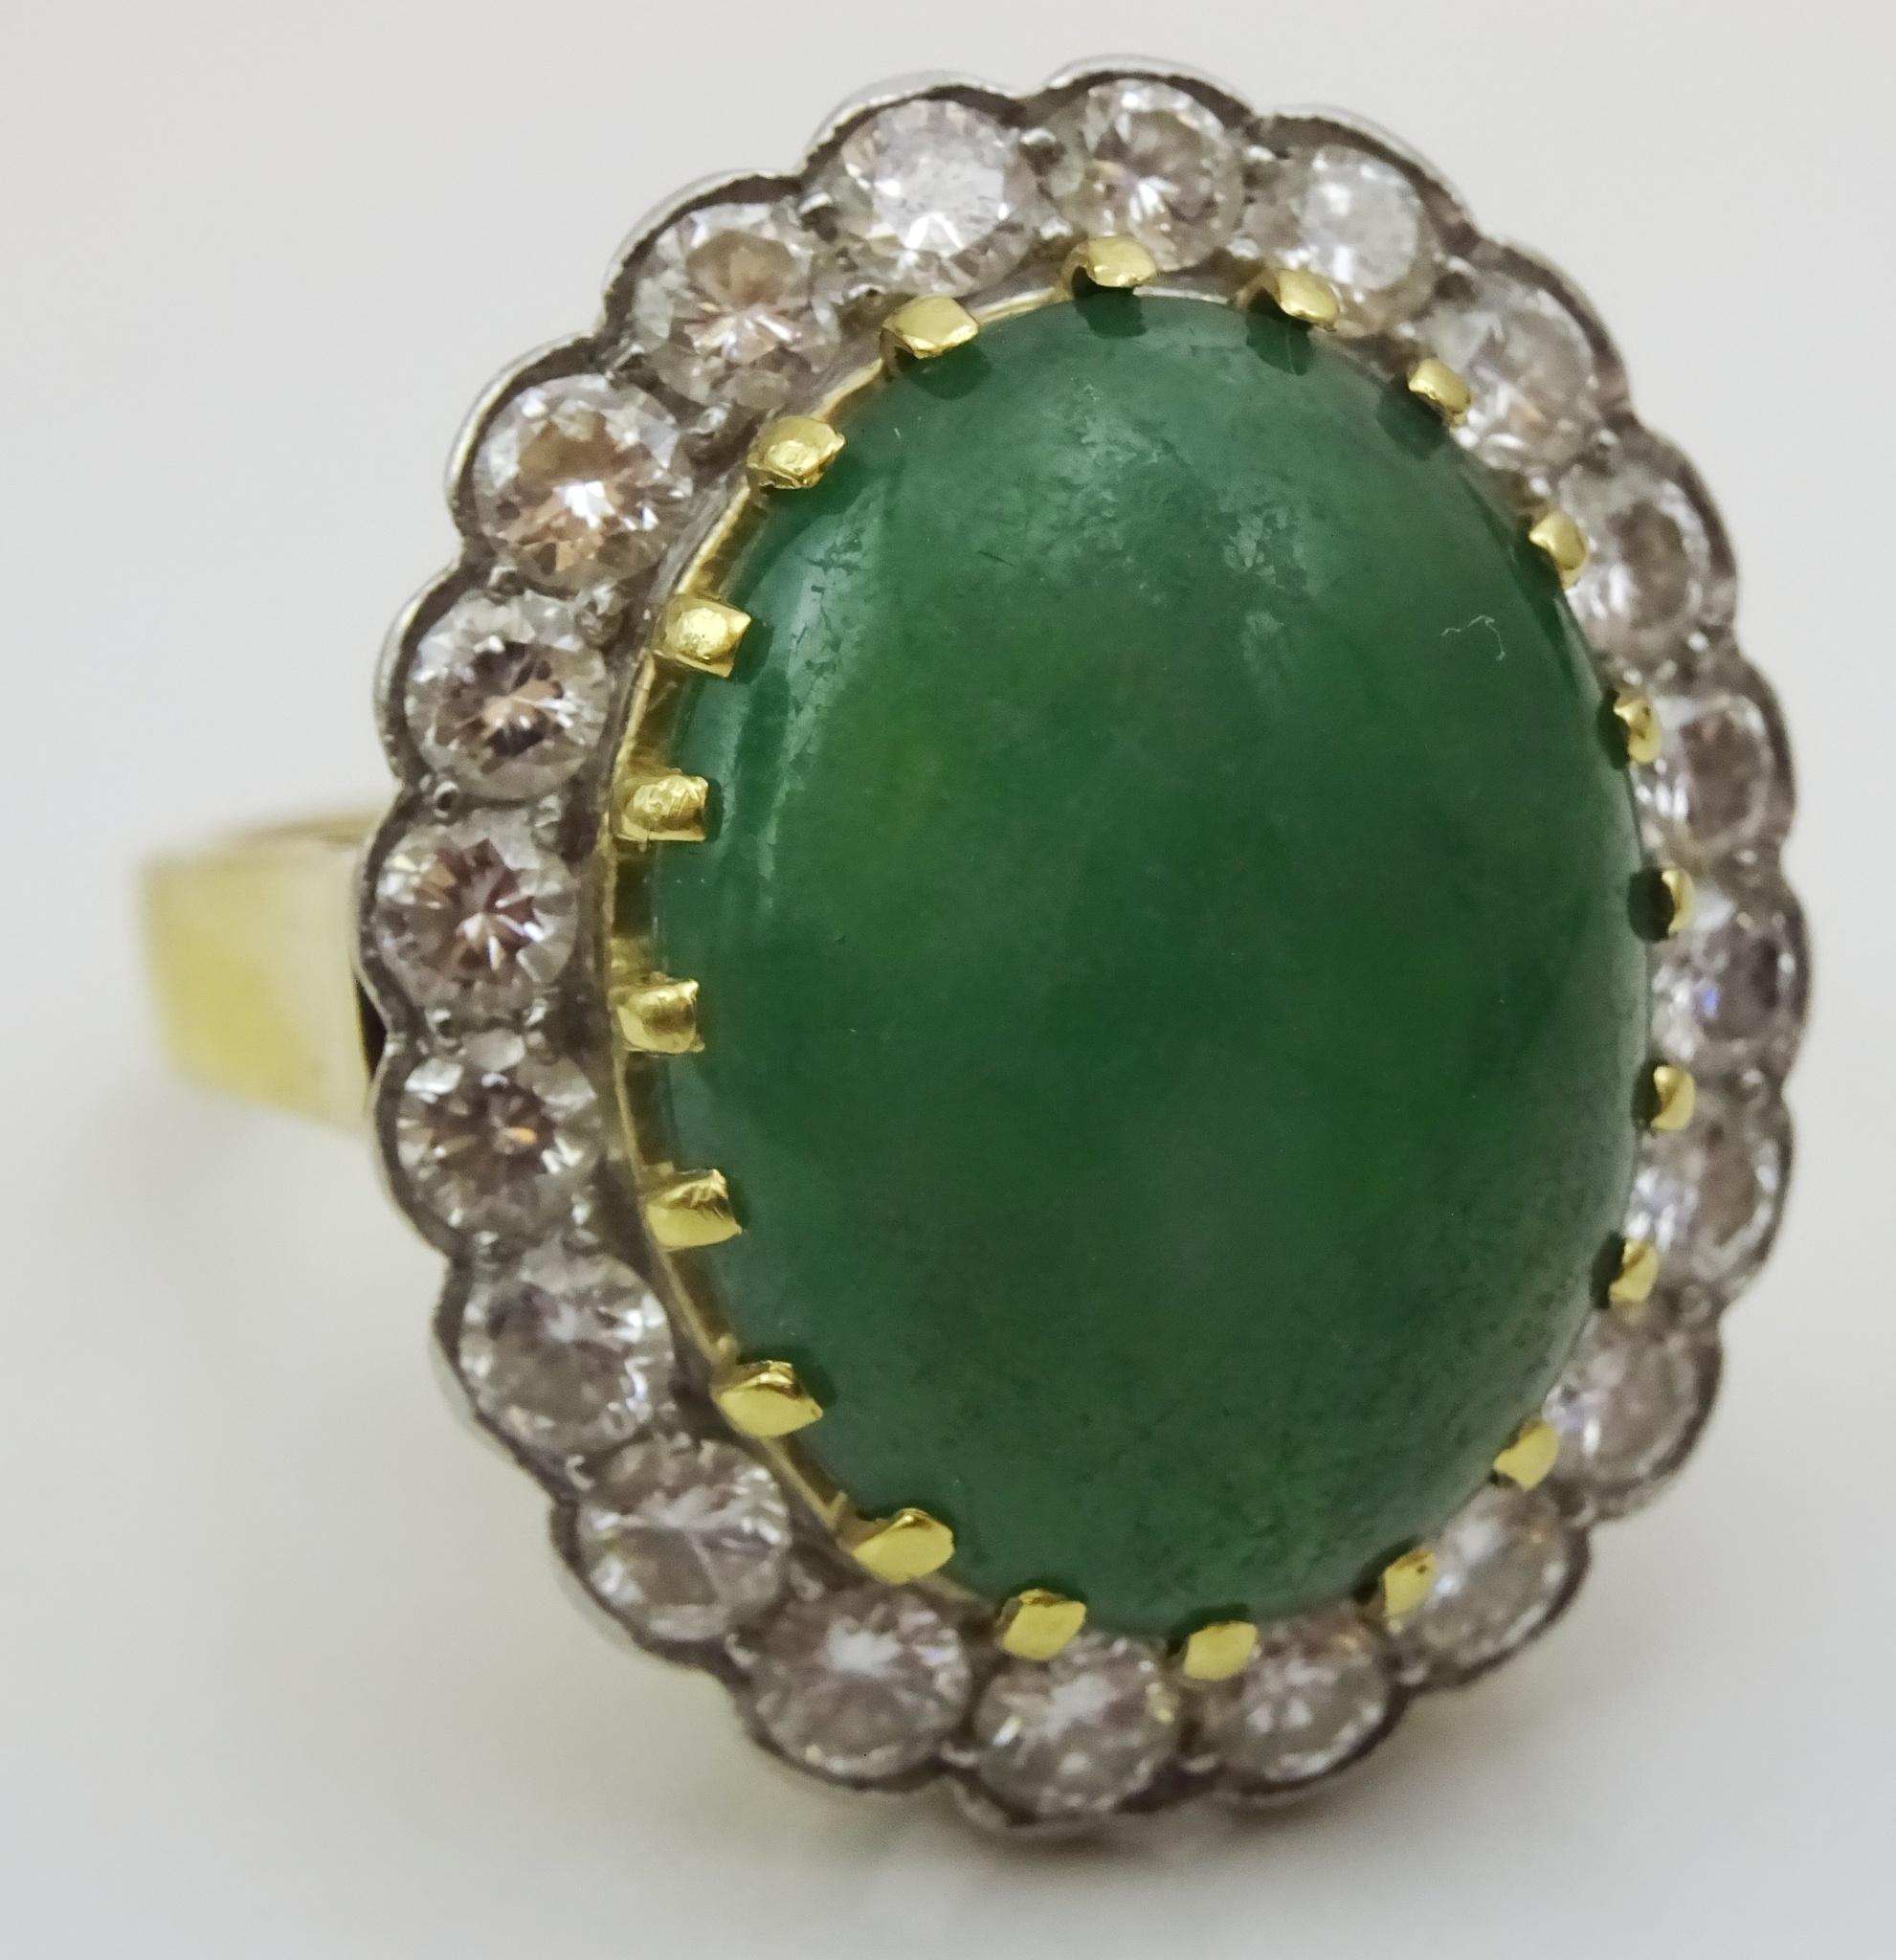 An exquisite high quality Ring , bought from a private client.
According to the individual i bough this ring was bought in the 1960's.
Composed of a central Dark Green Jade measuring 12 x 16 mm oval that is surrounded by 20 3.2 mm Diamonds , VS